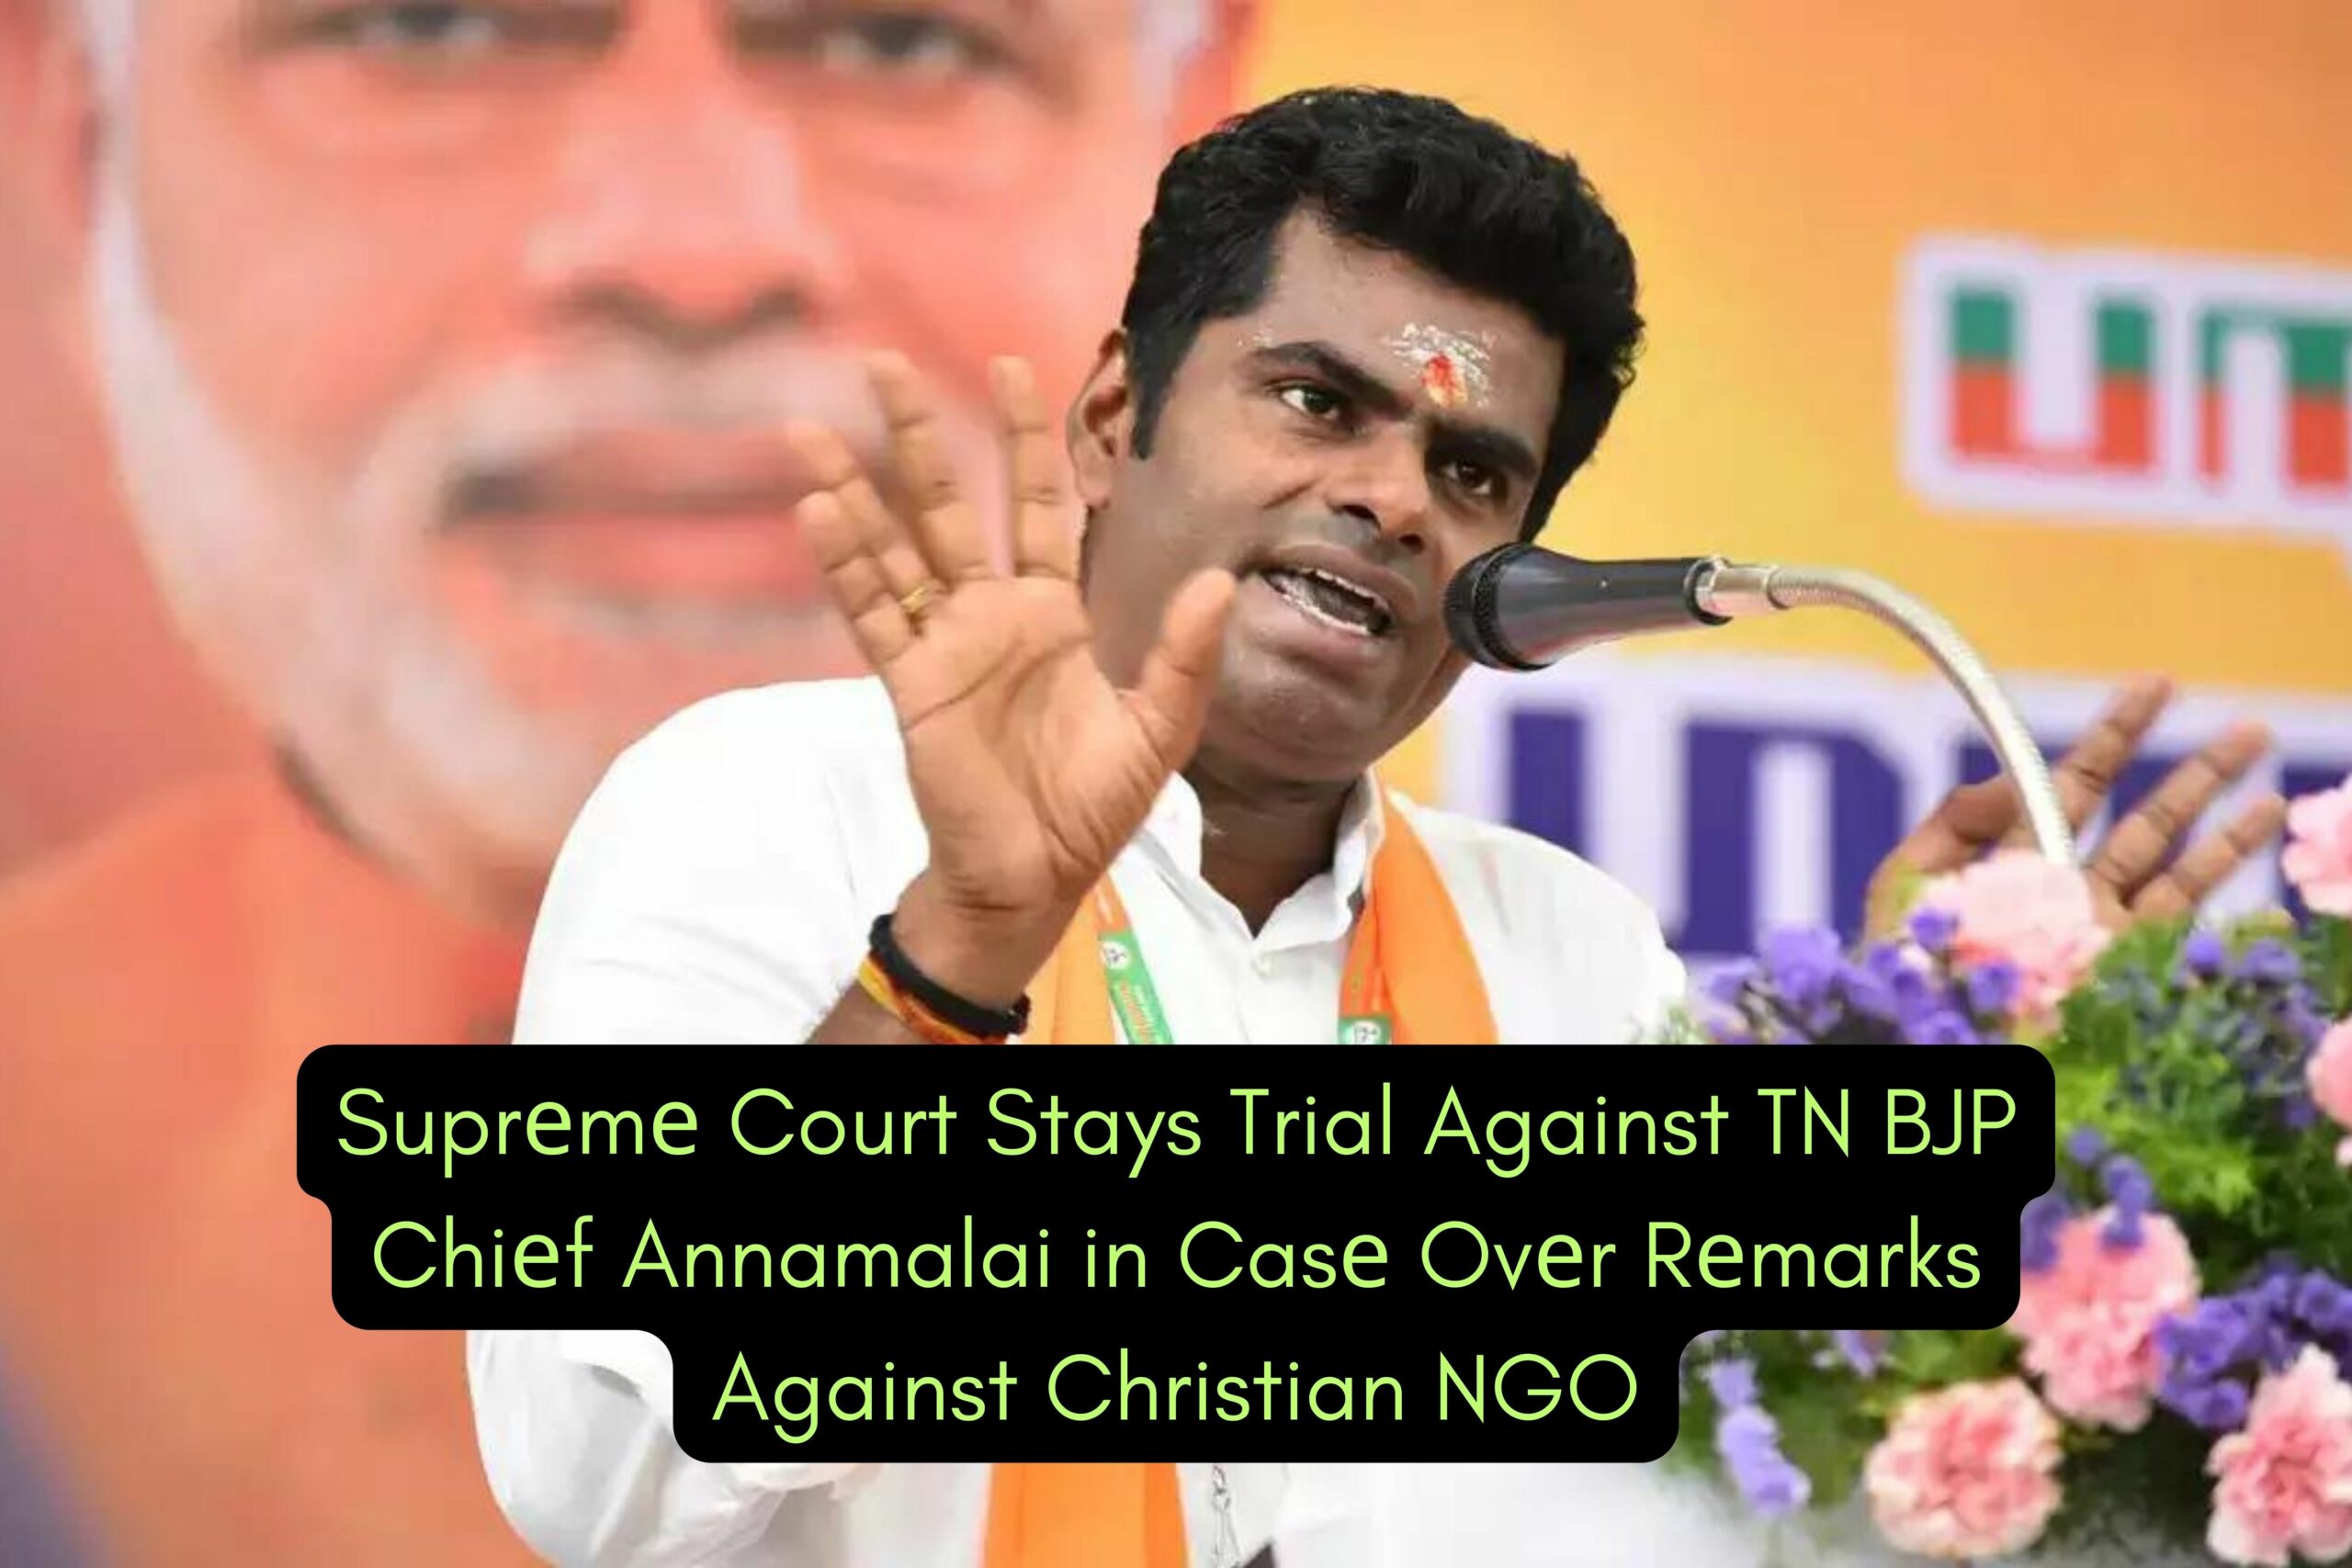 BJP Chief Annamalai's Trial Stayed